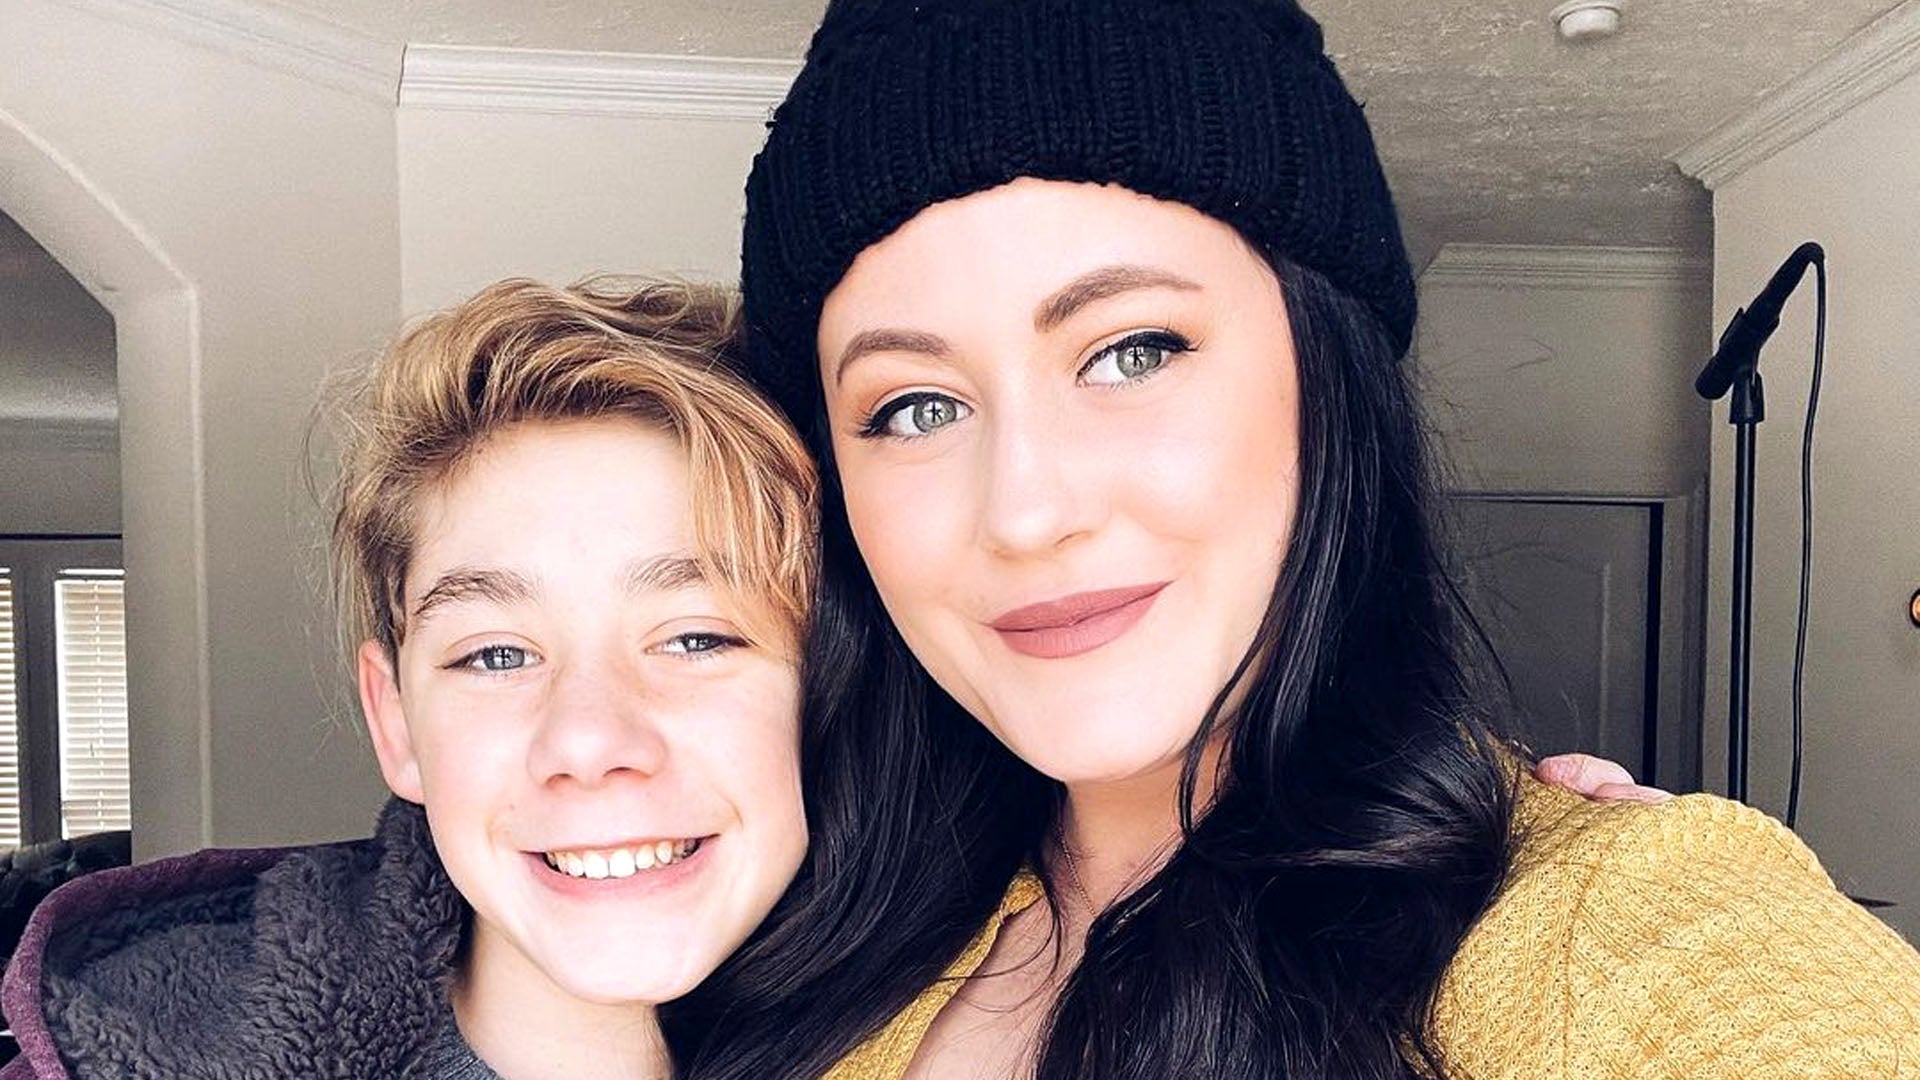 Jenelle Evans Says Online Trolls Have 'Definitely' Caused Anxiety